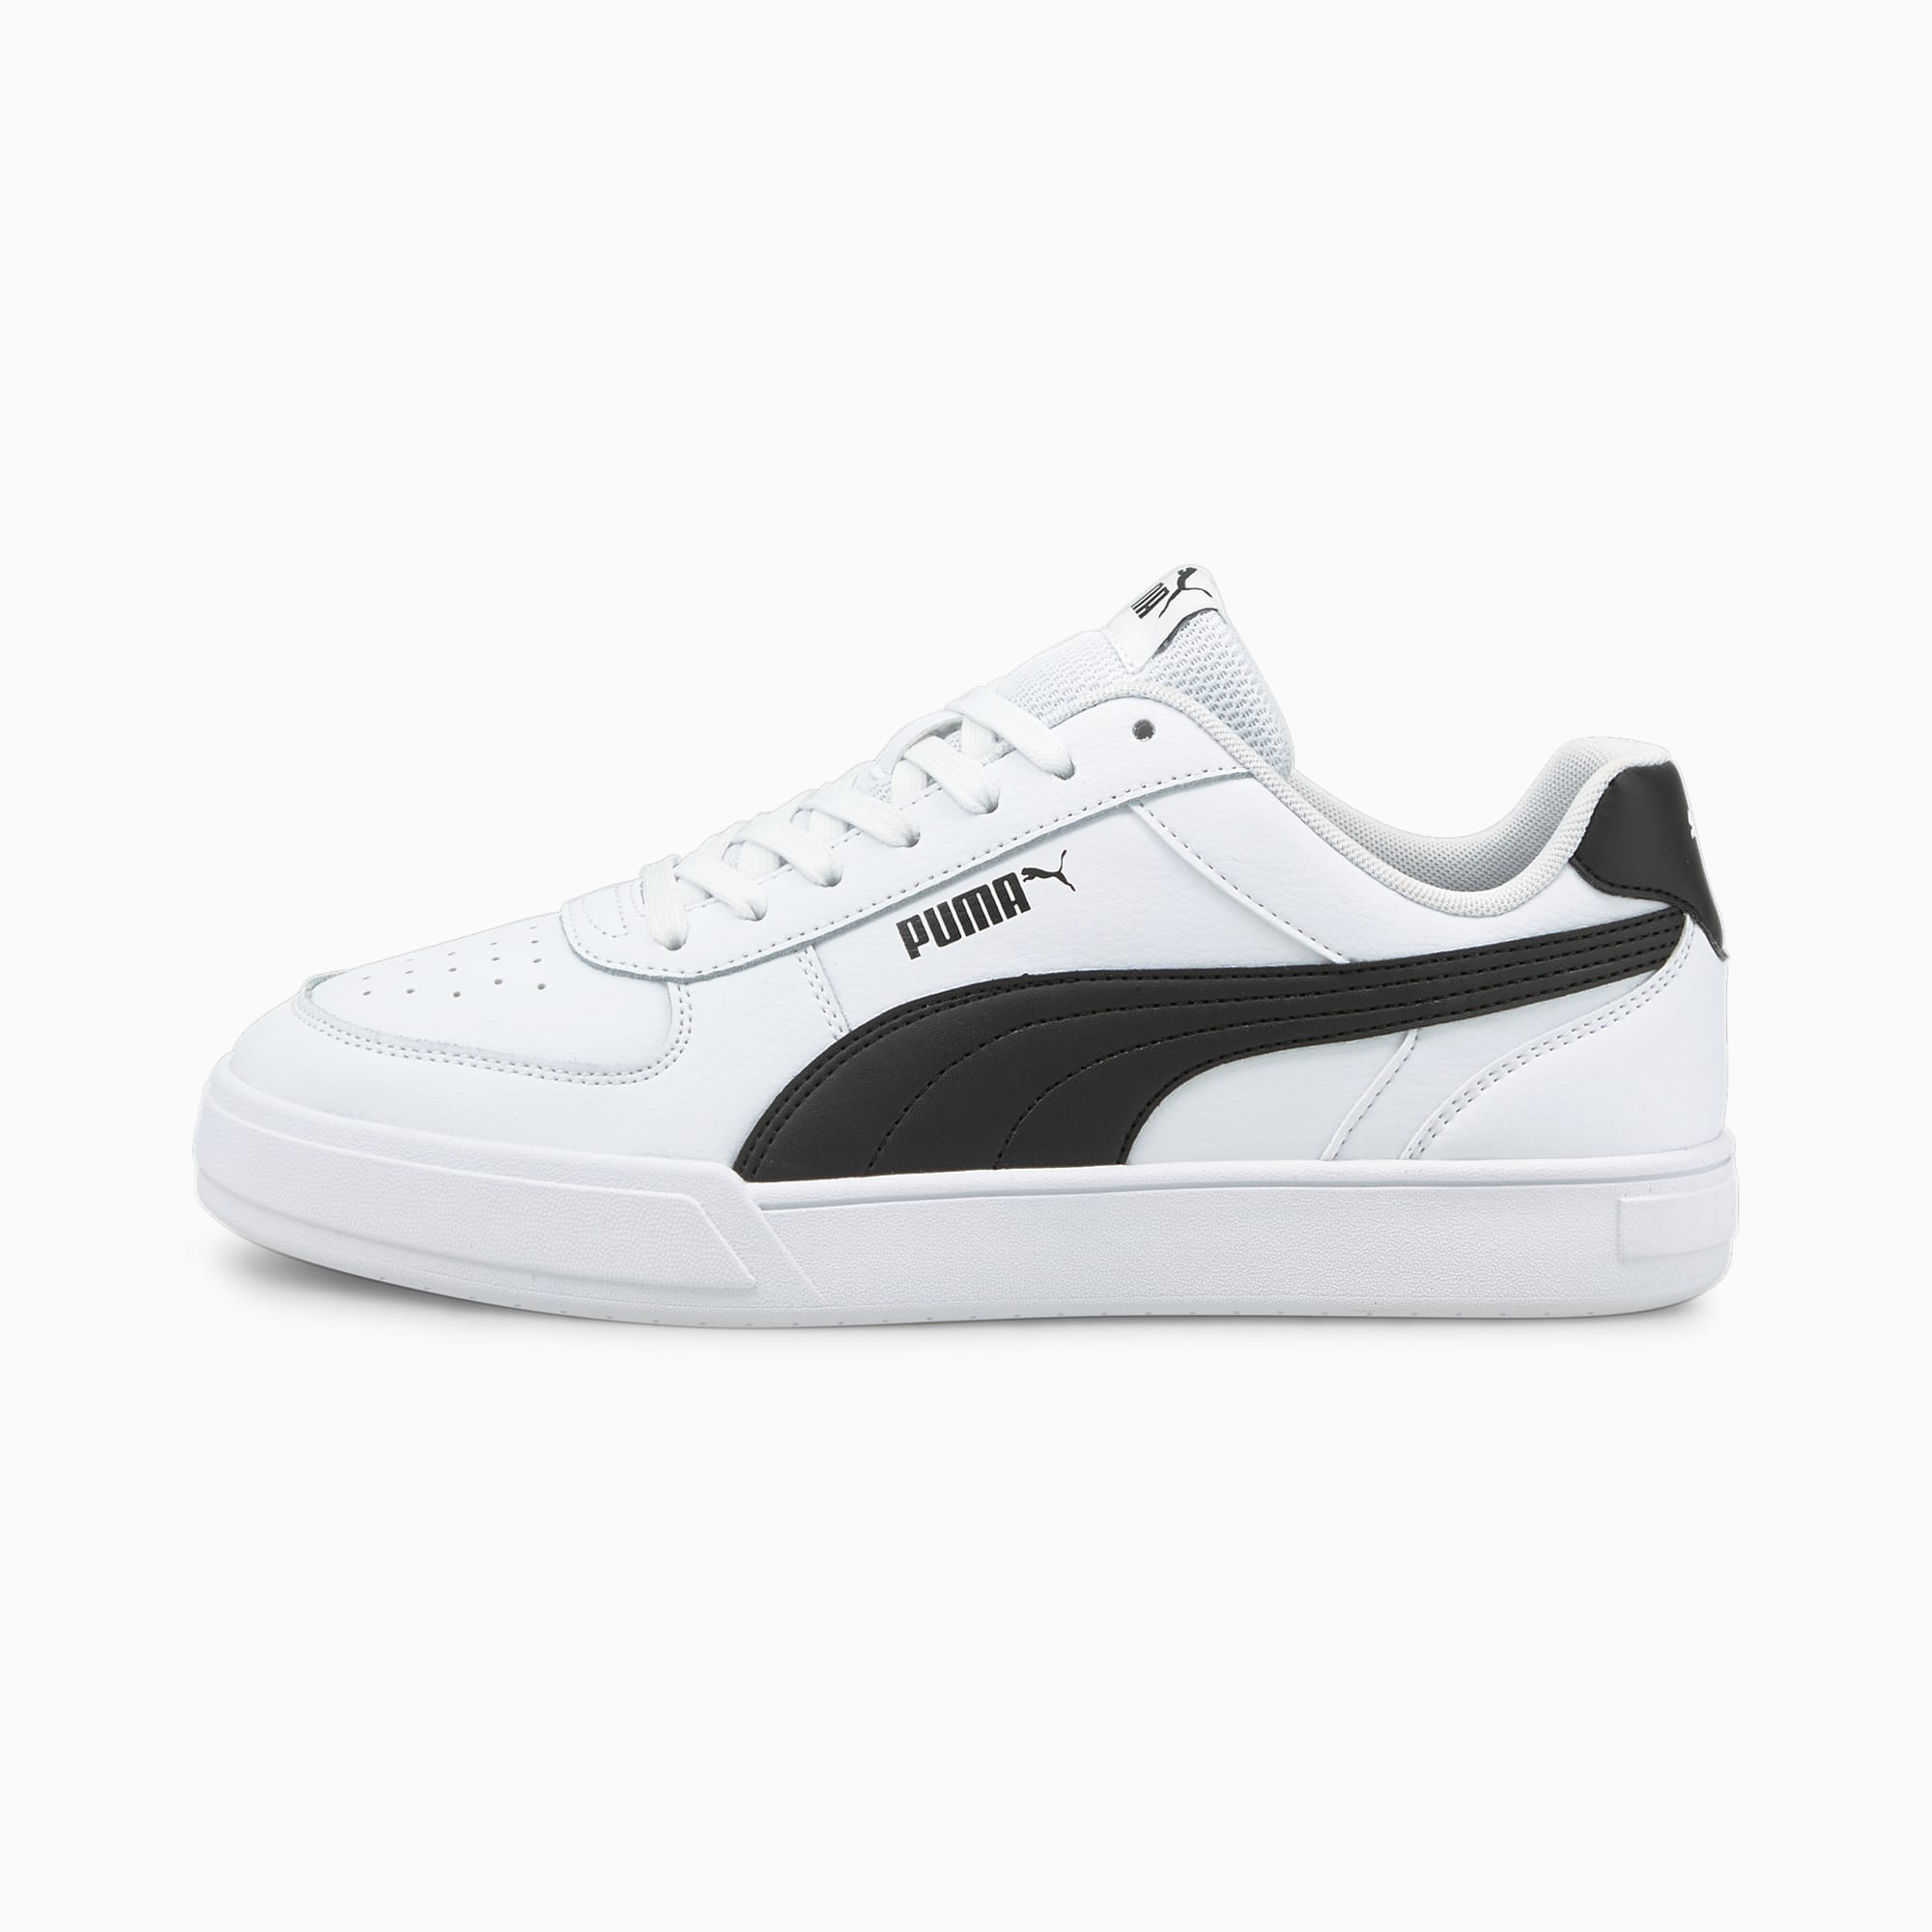 Puma Shoes Best Price In Pakistan | peacecommission.kdsg.gov.ng